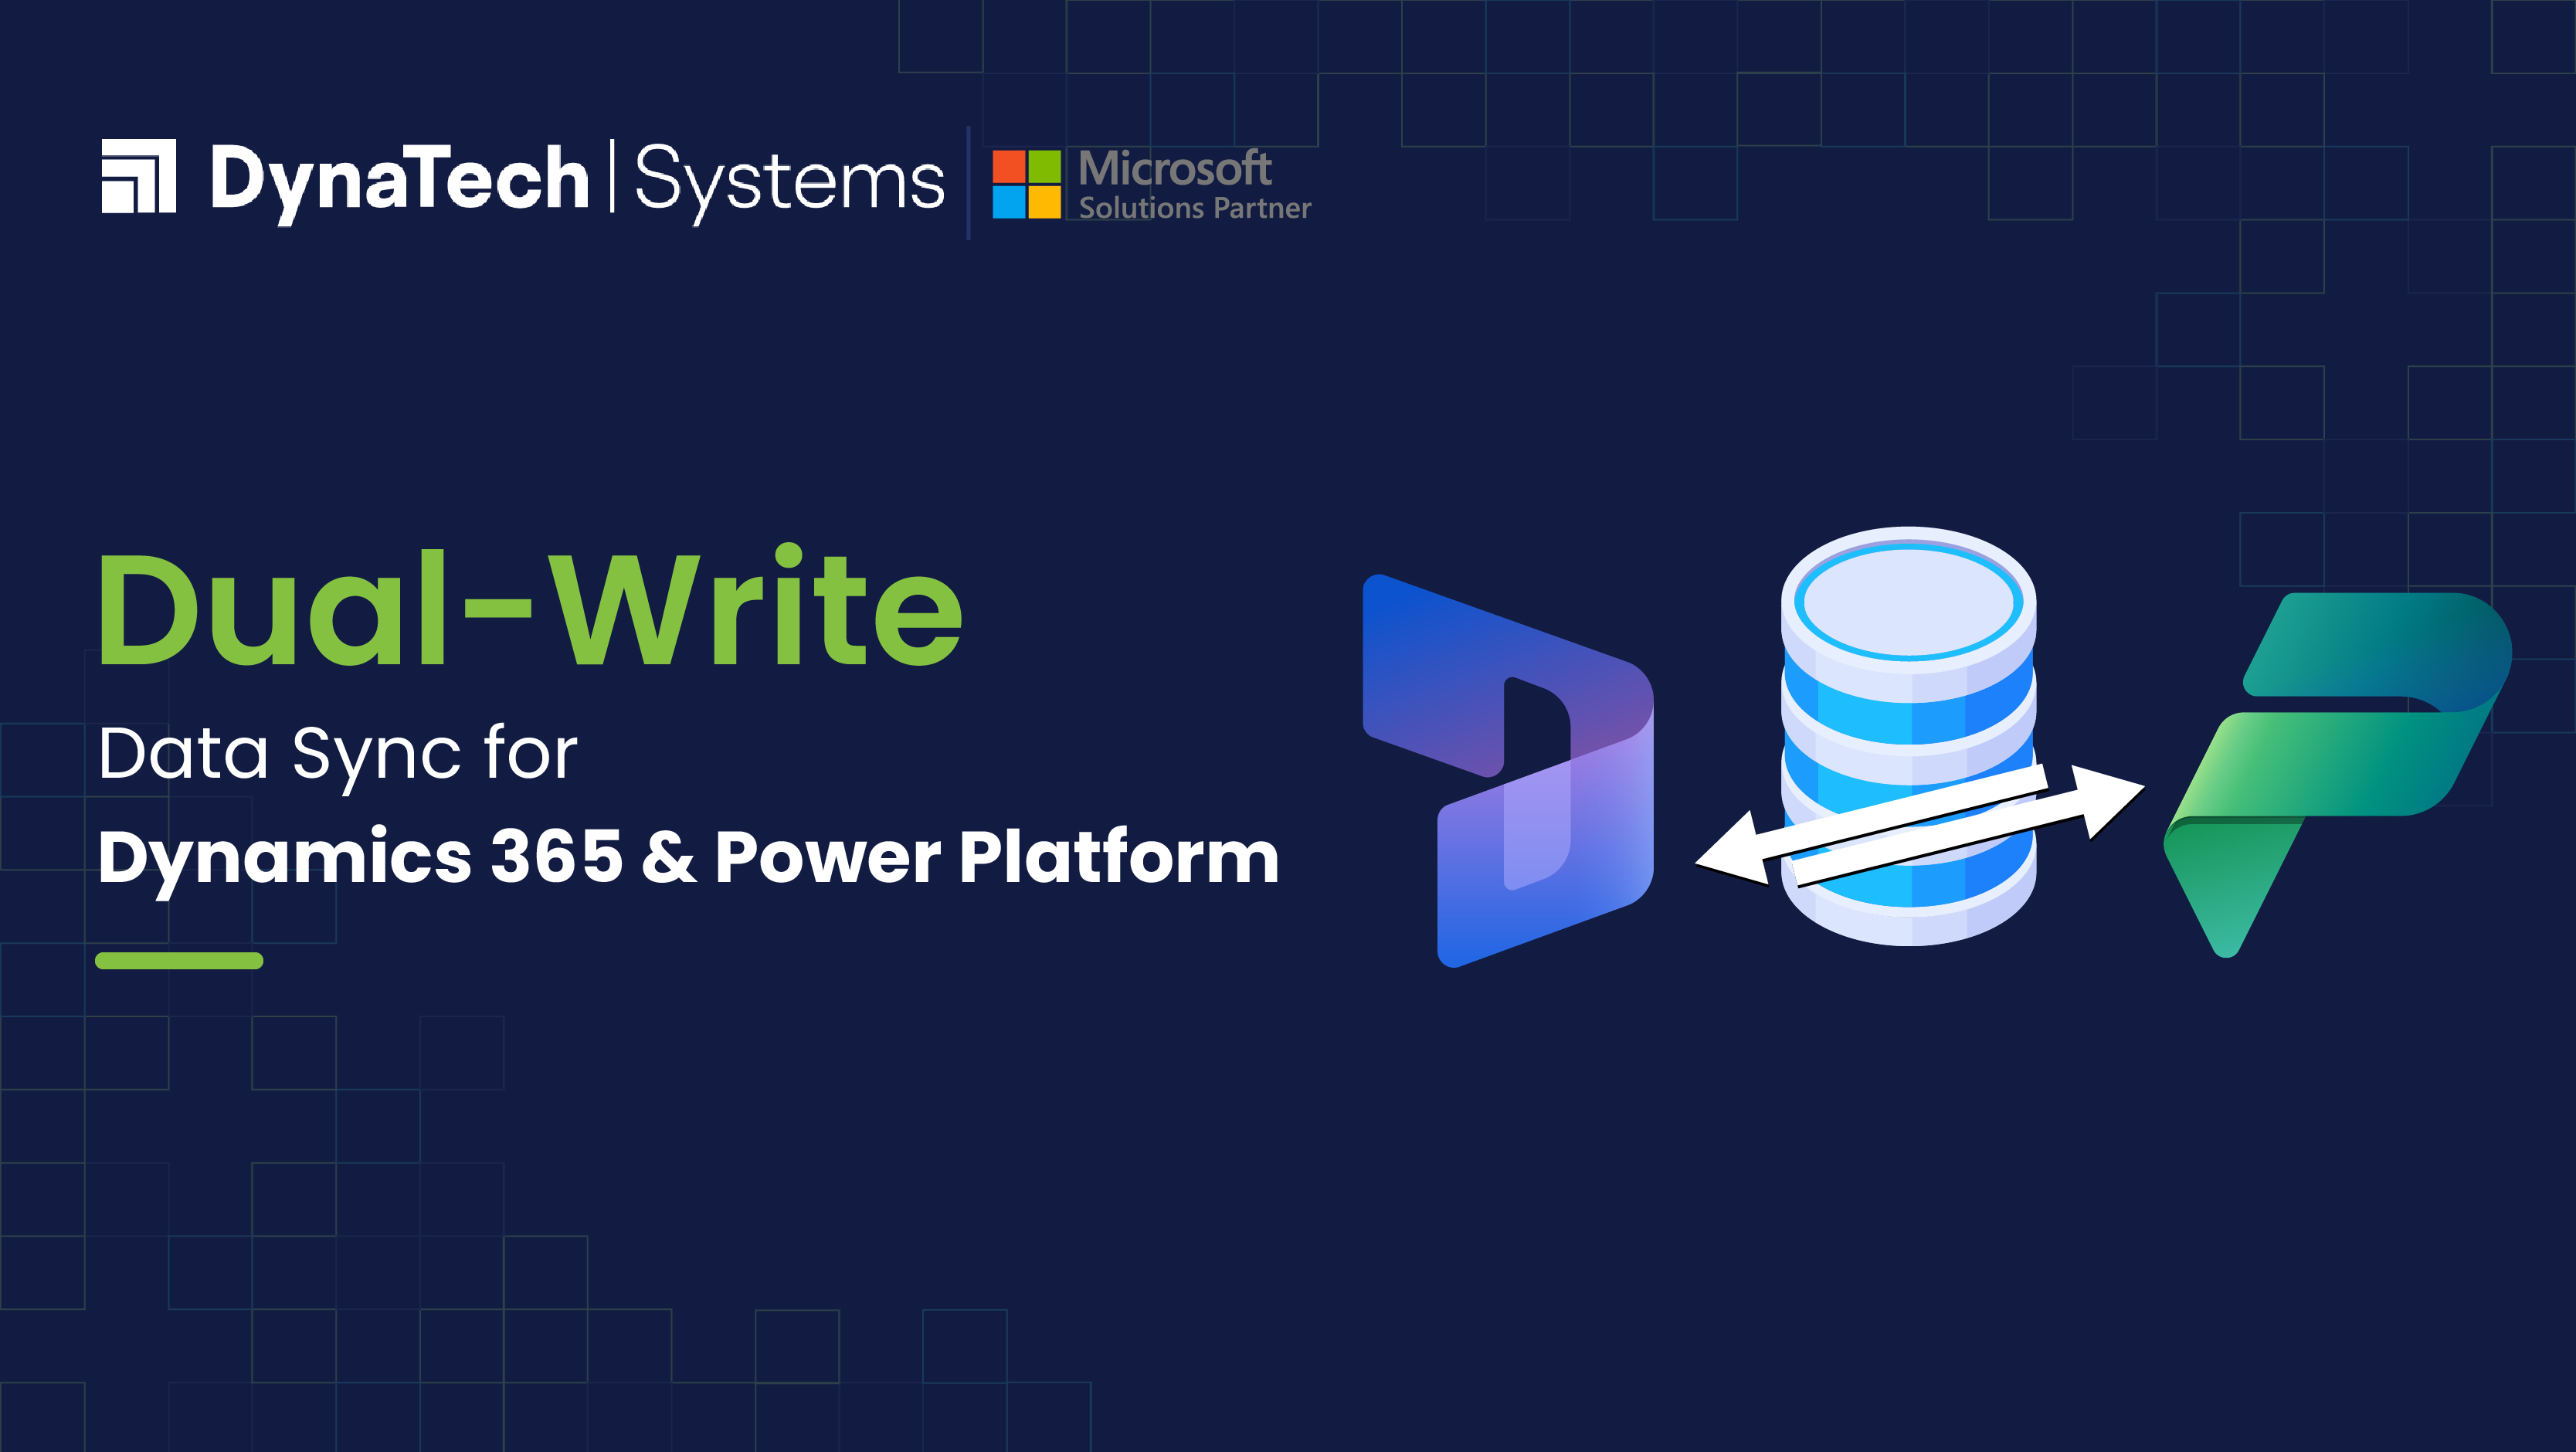 Dual-Write is changing the game of Microsoft Dynamics 365 and Power Platform Eco-System